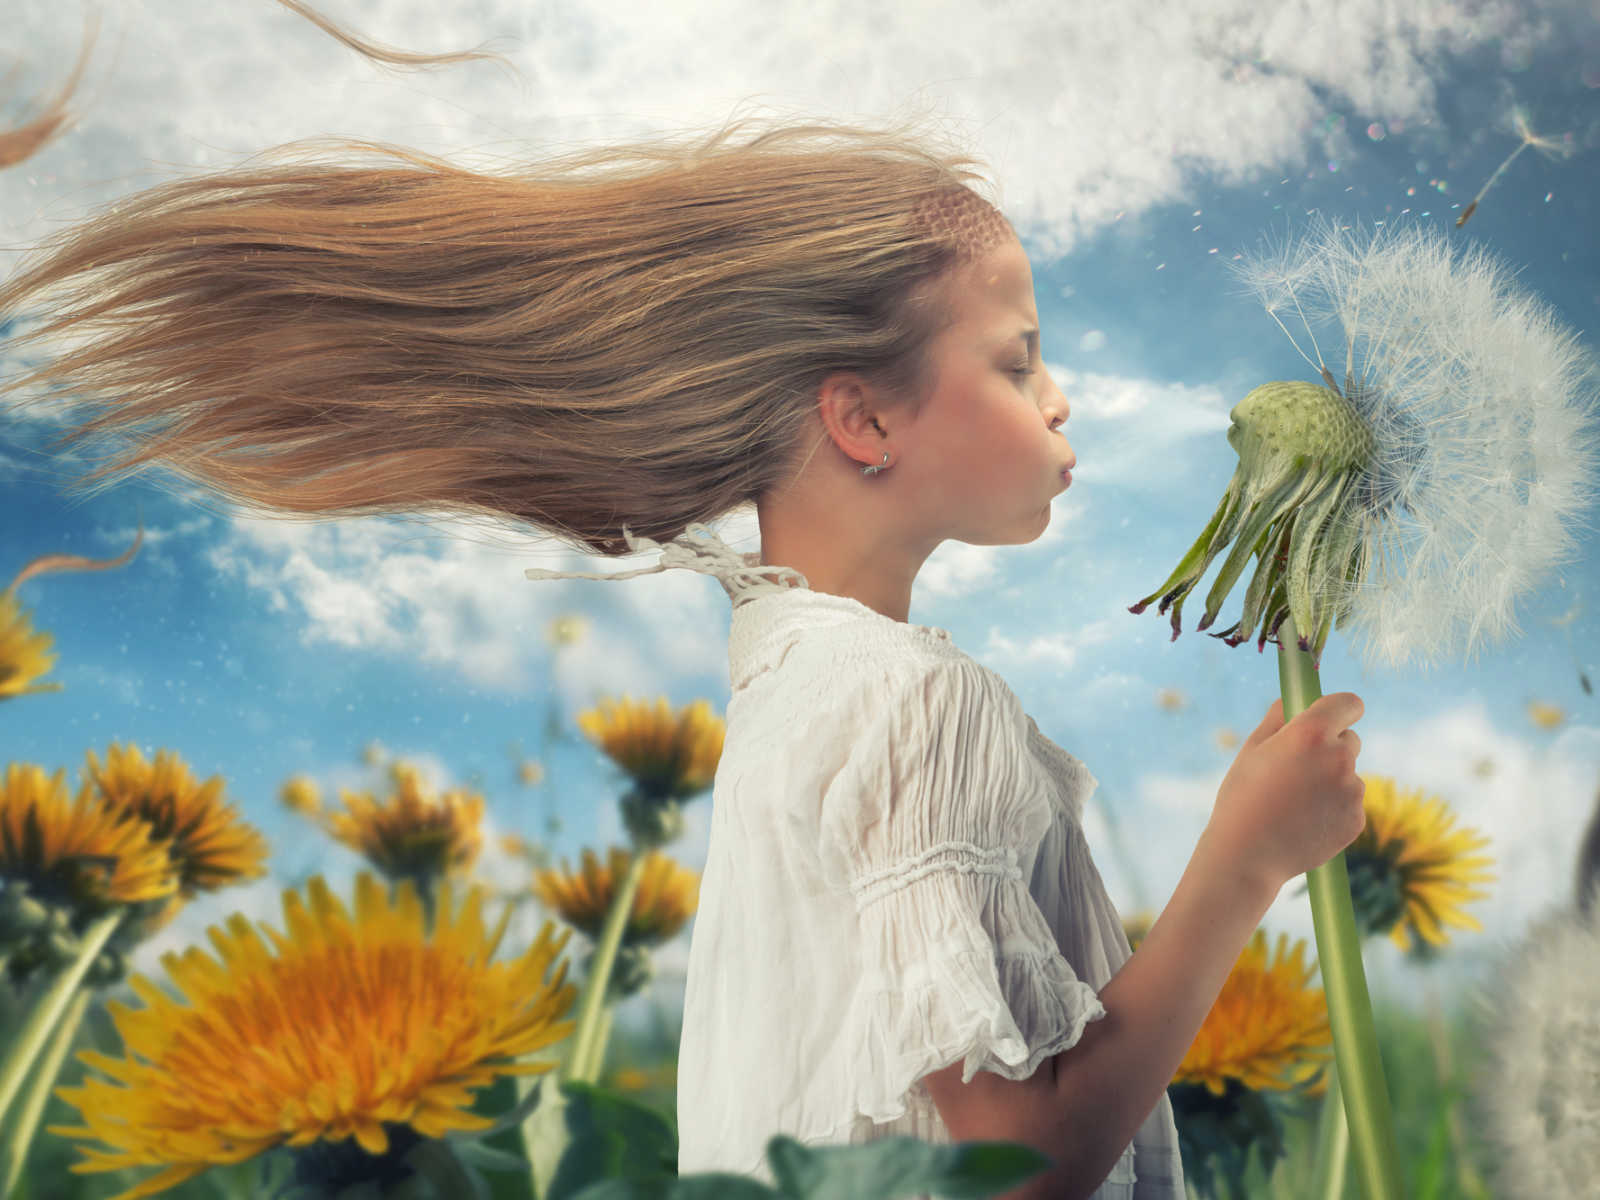 young girl with hair blowing in the wind blows at enlarged animated dandelion